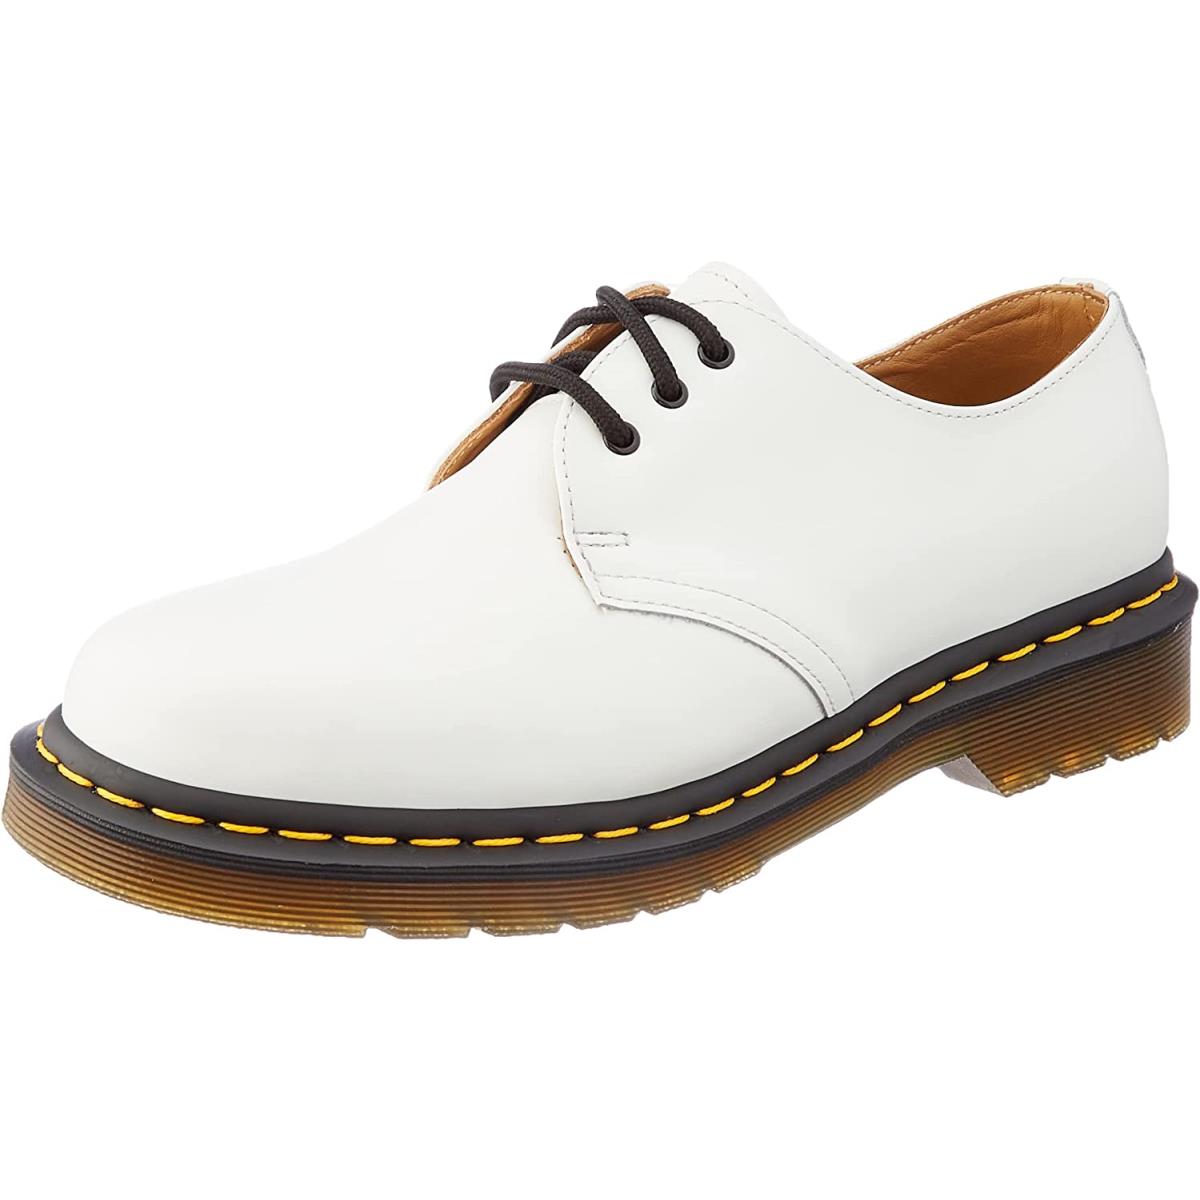 Dr. Martens 1461 3-Eye Leather Oxford Shoe For Men and Women White